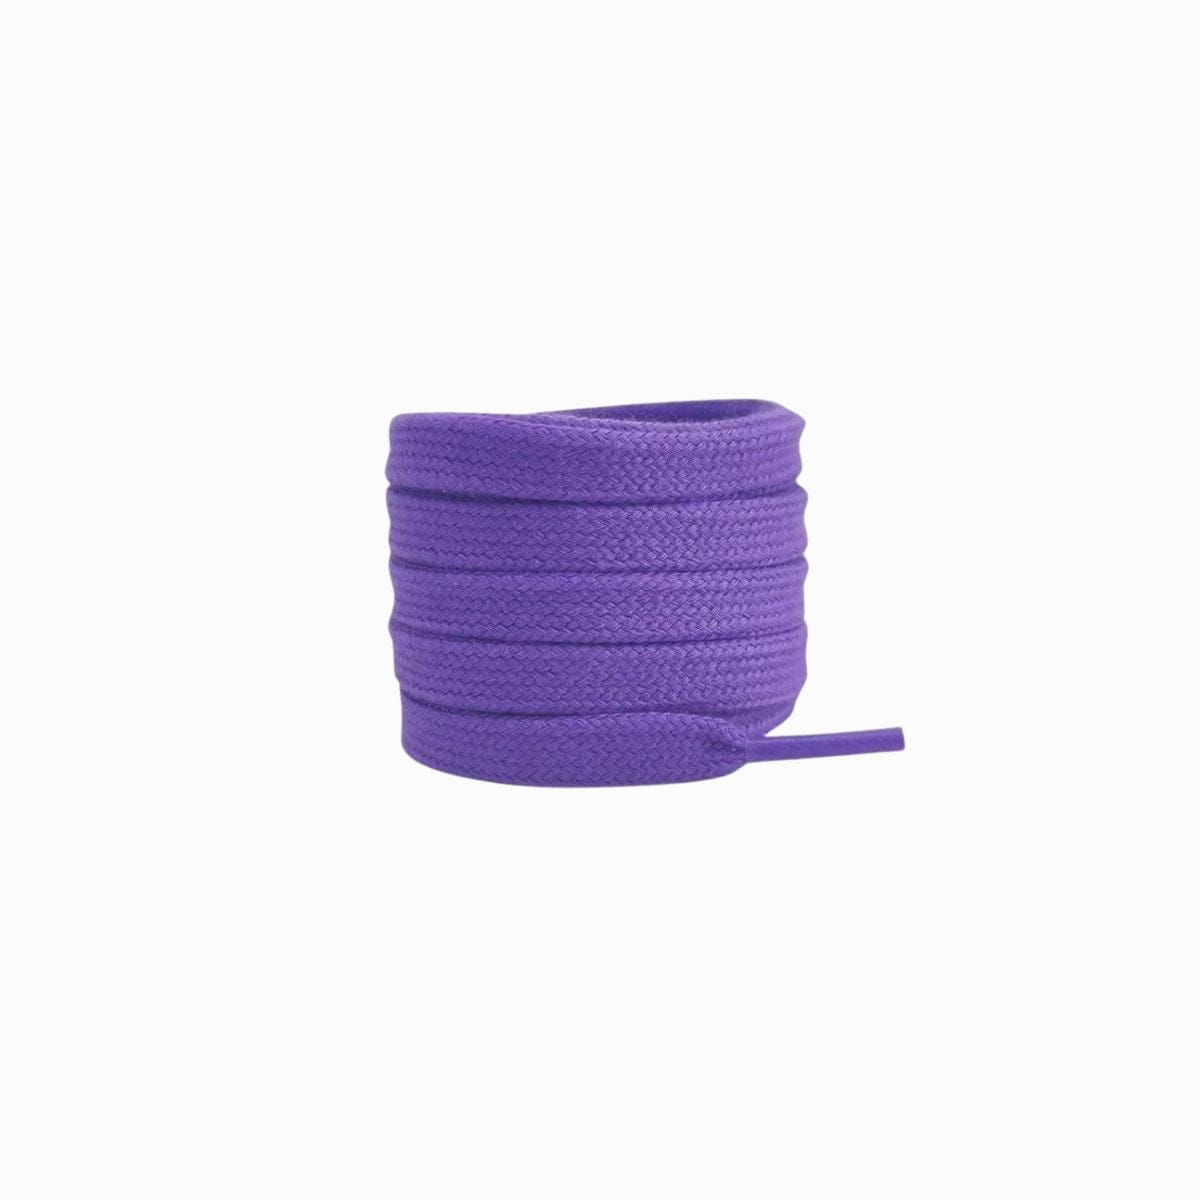 Purple Replacement Adidas Shoe Laces for Adidas Gazelle Sneakers by Kicks Shoelaces